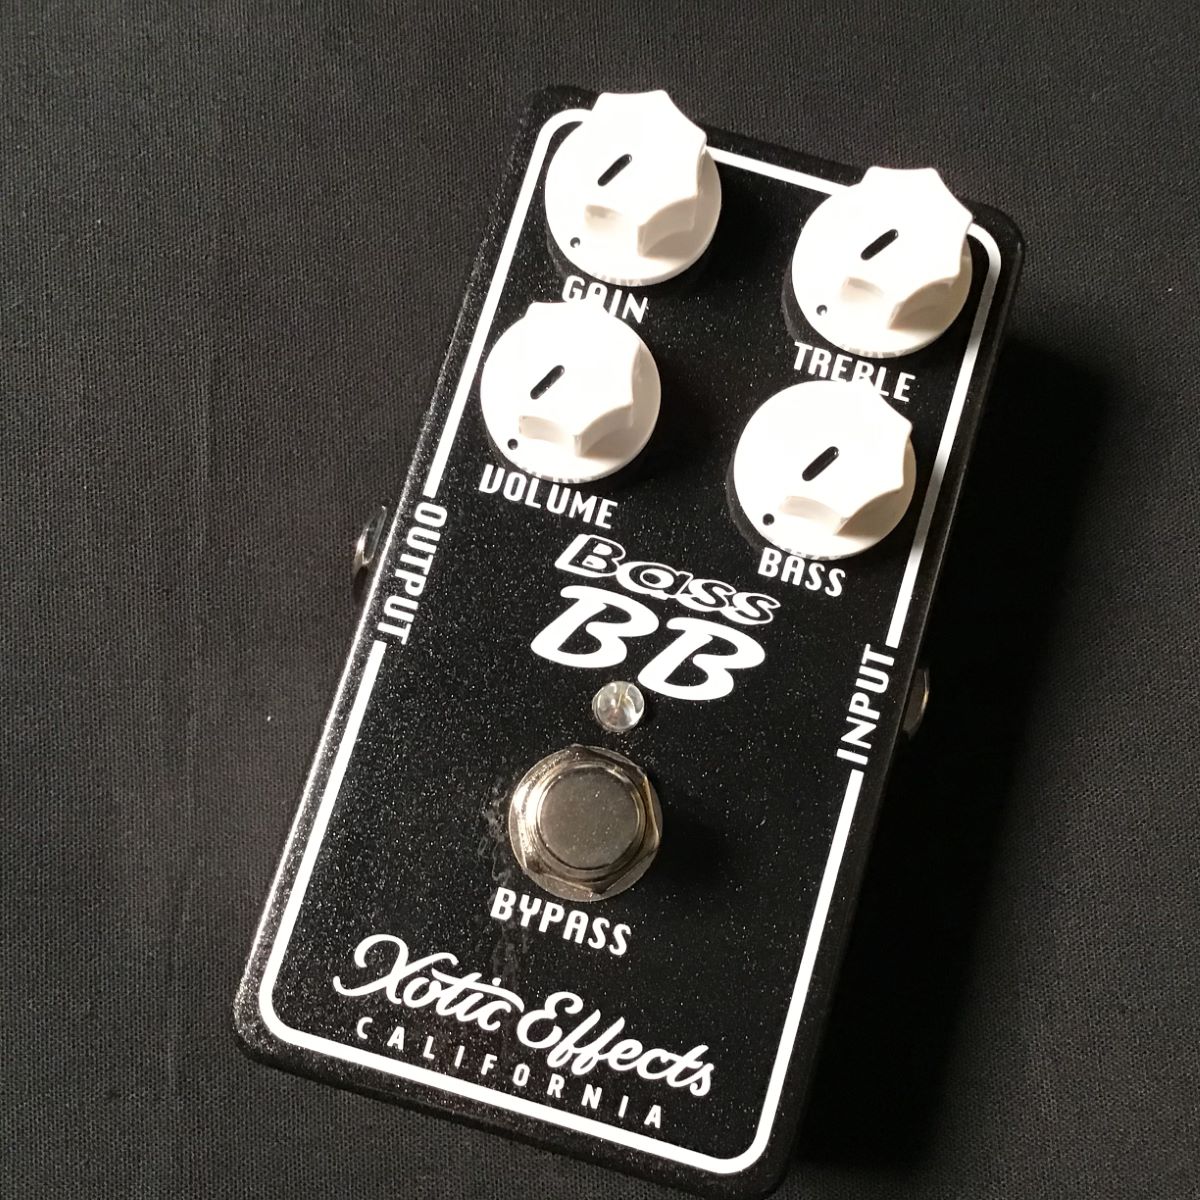 Xotic Bass BB preamp ベース用プリアンプ